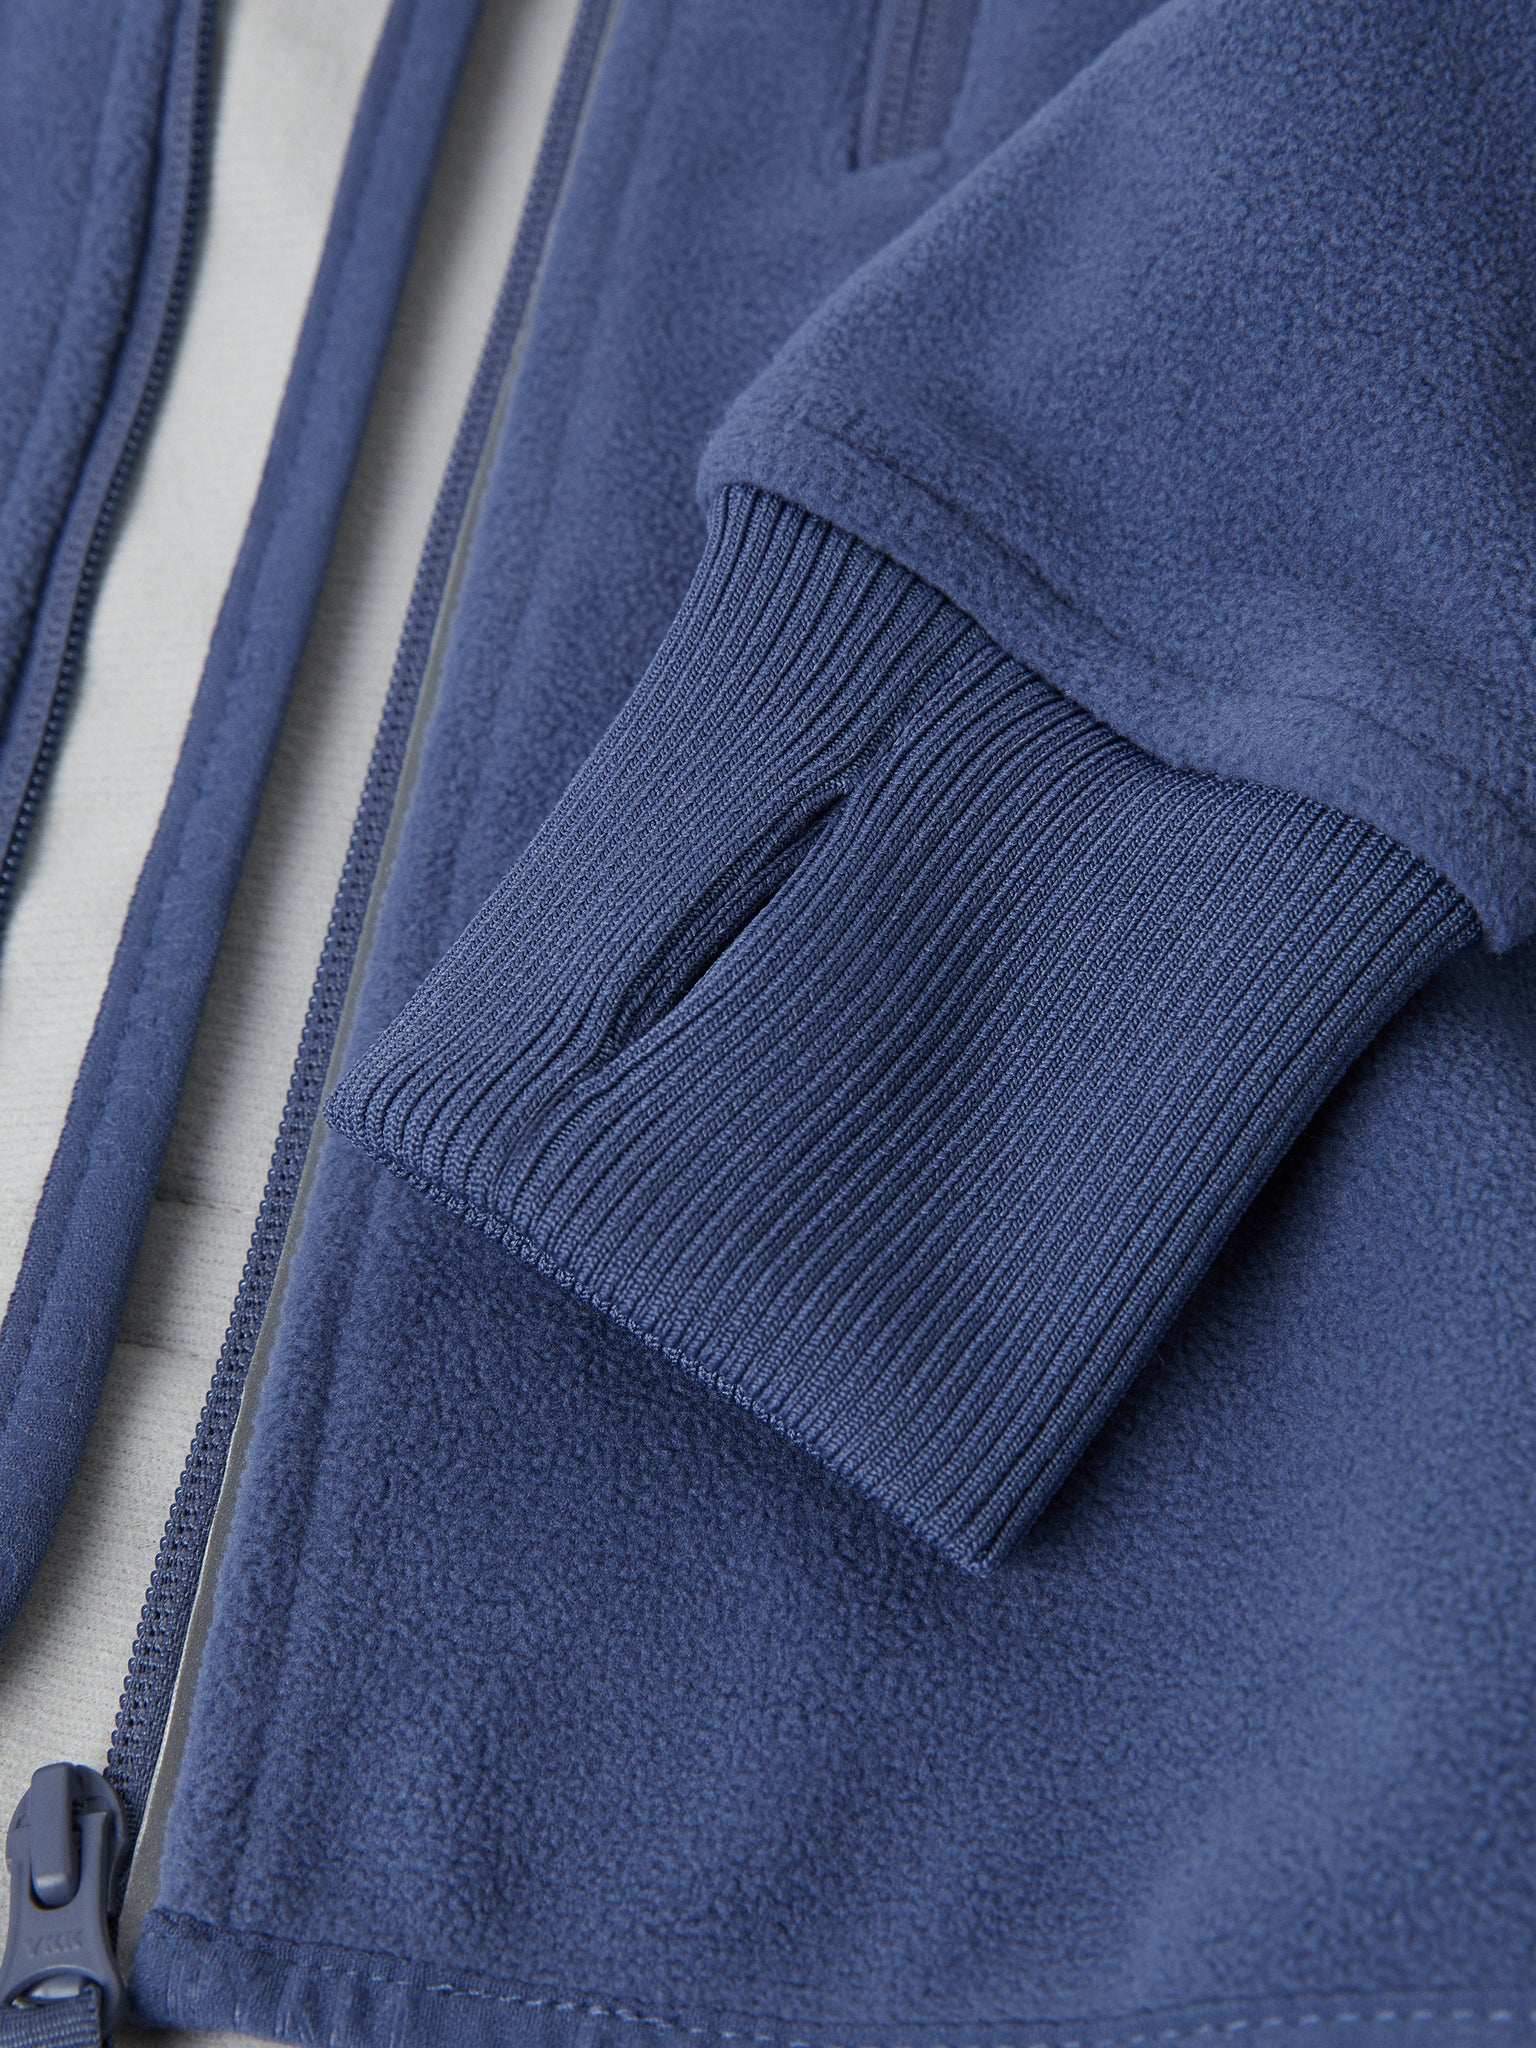 Blue Waterproof Kids Fleece Jacket from the Polarn O. Pyret outerwear collection. Made using ethically sourced materials.